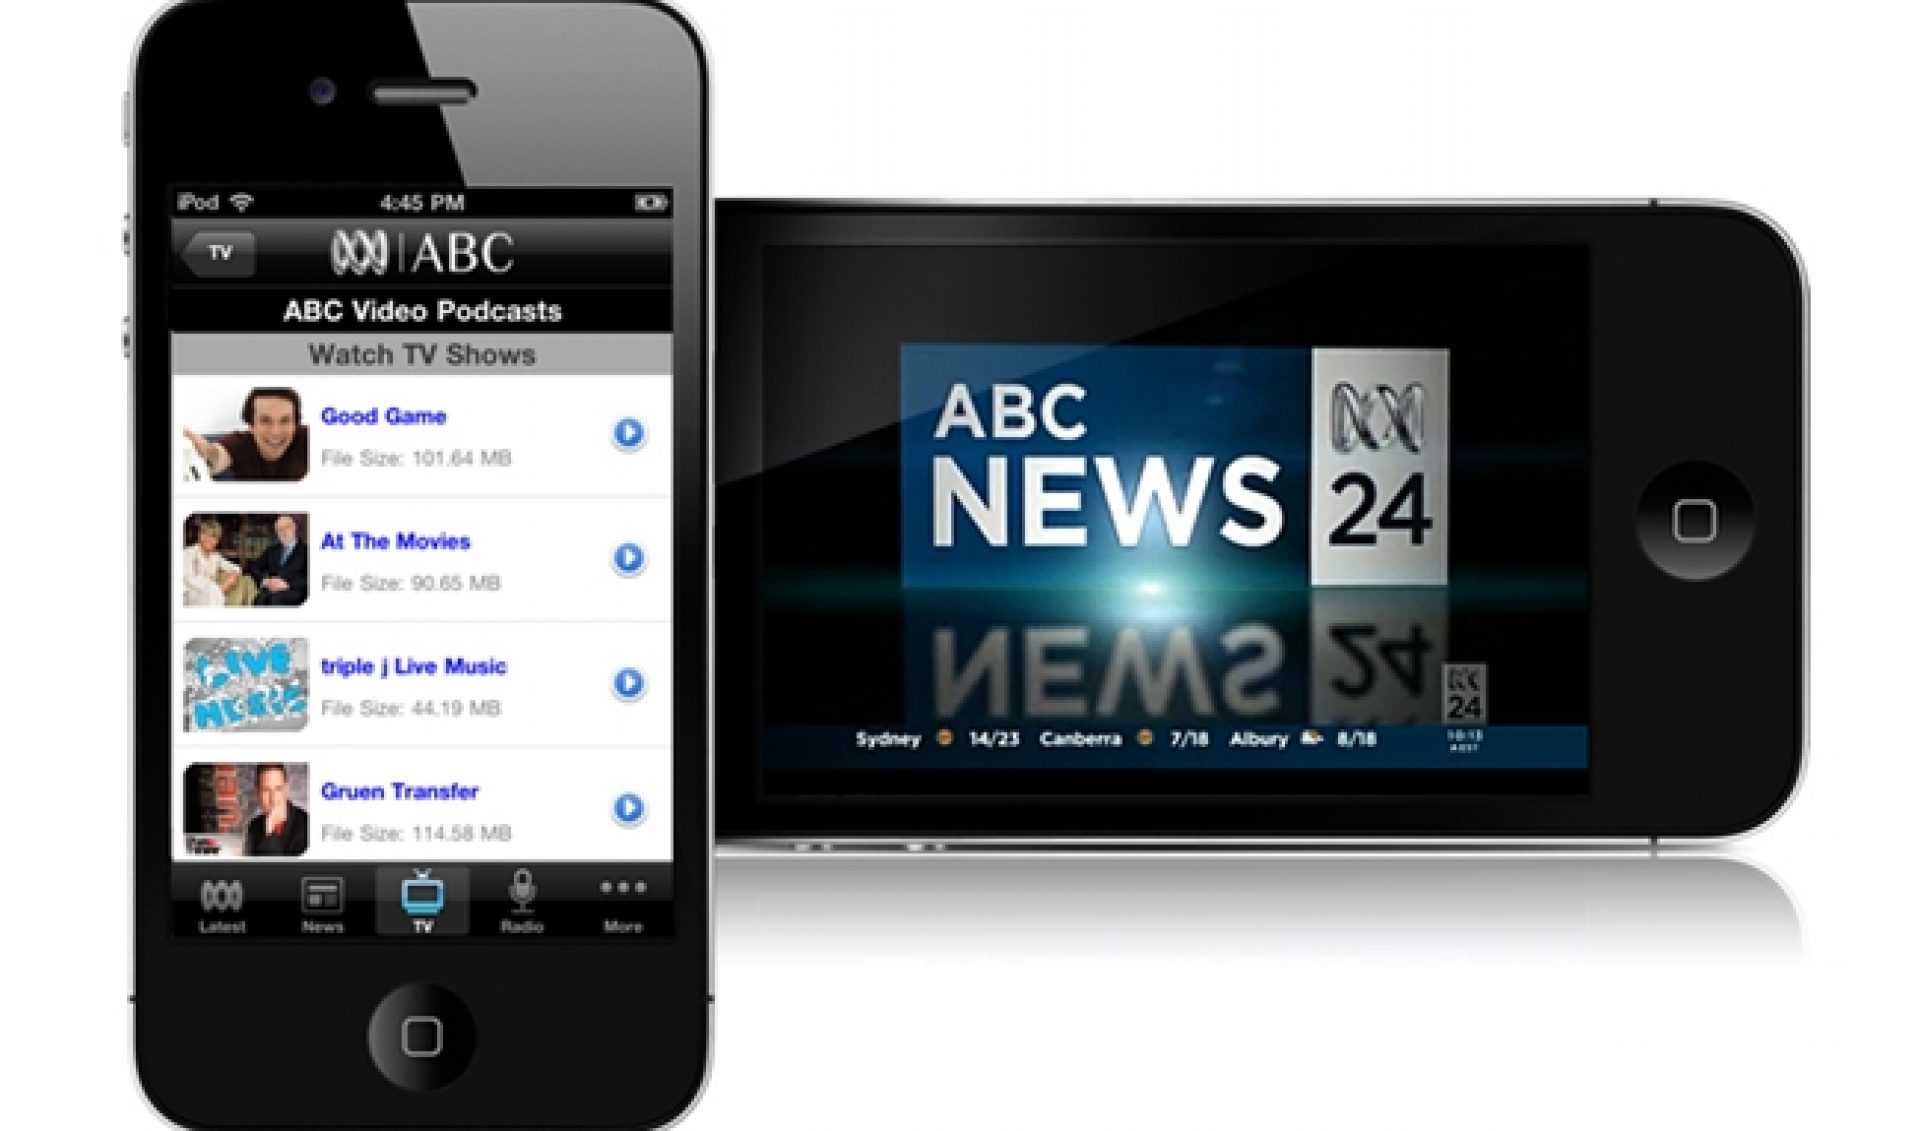 ABC Is First Network To Provide Mobile Live Streams For TV Stations